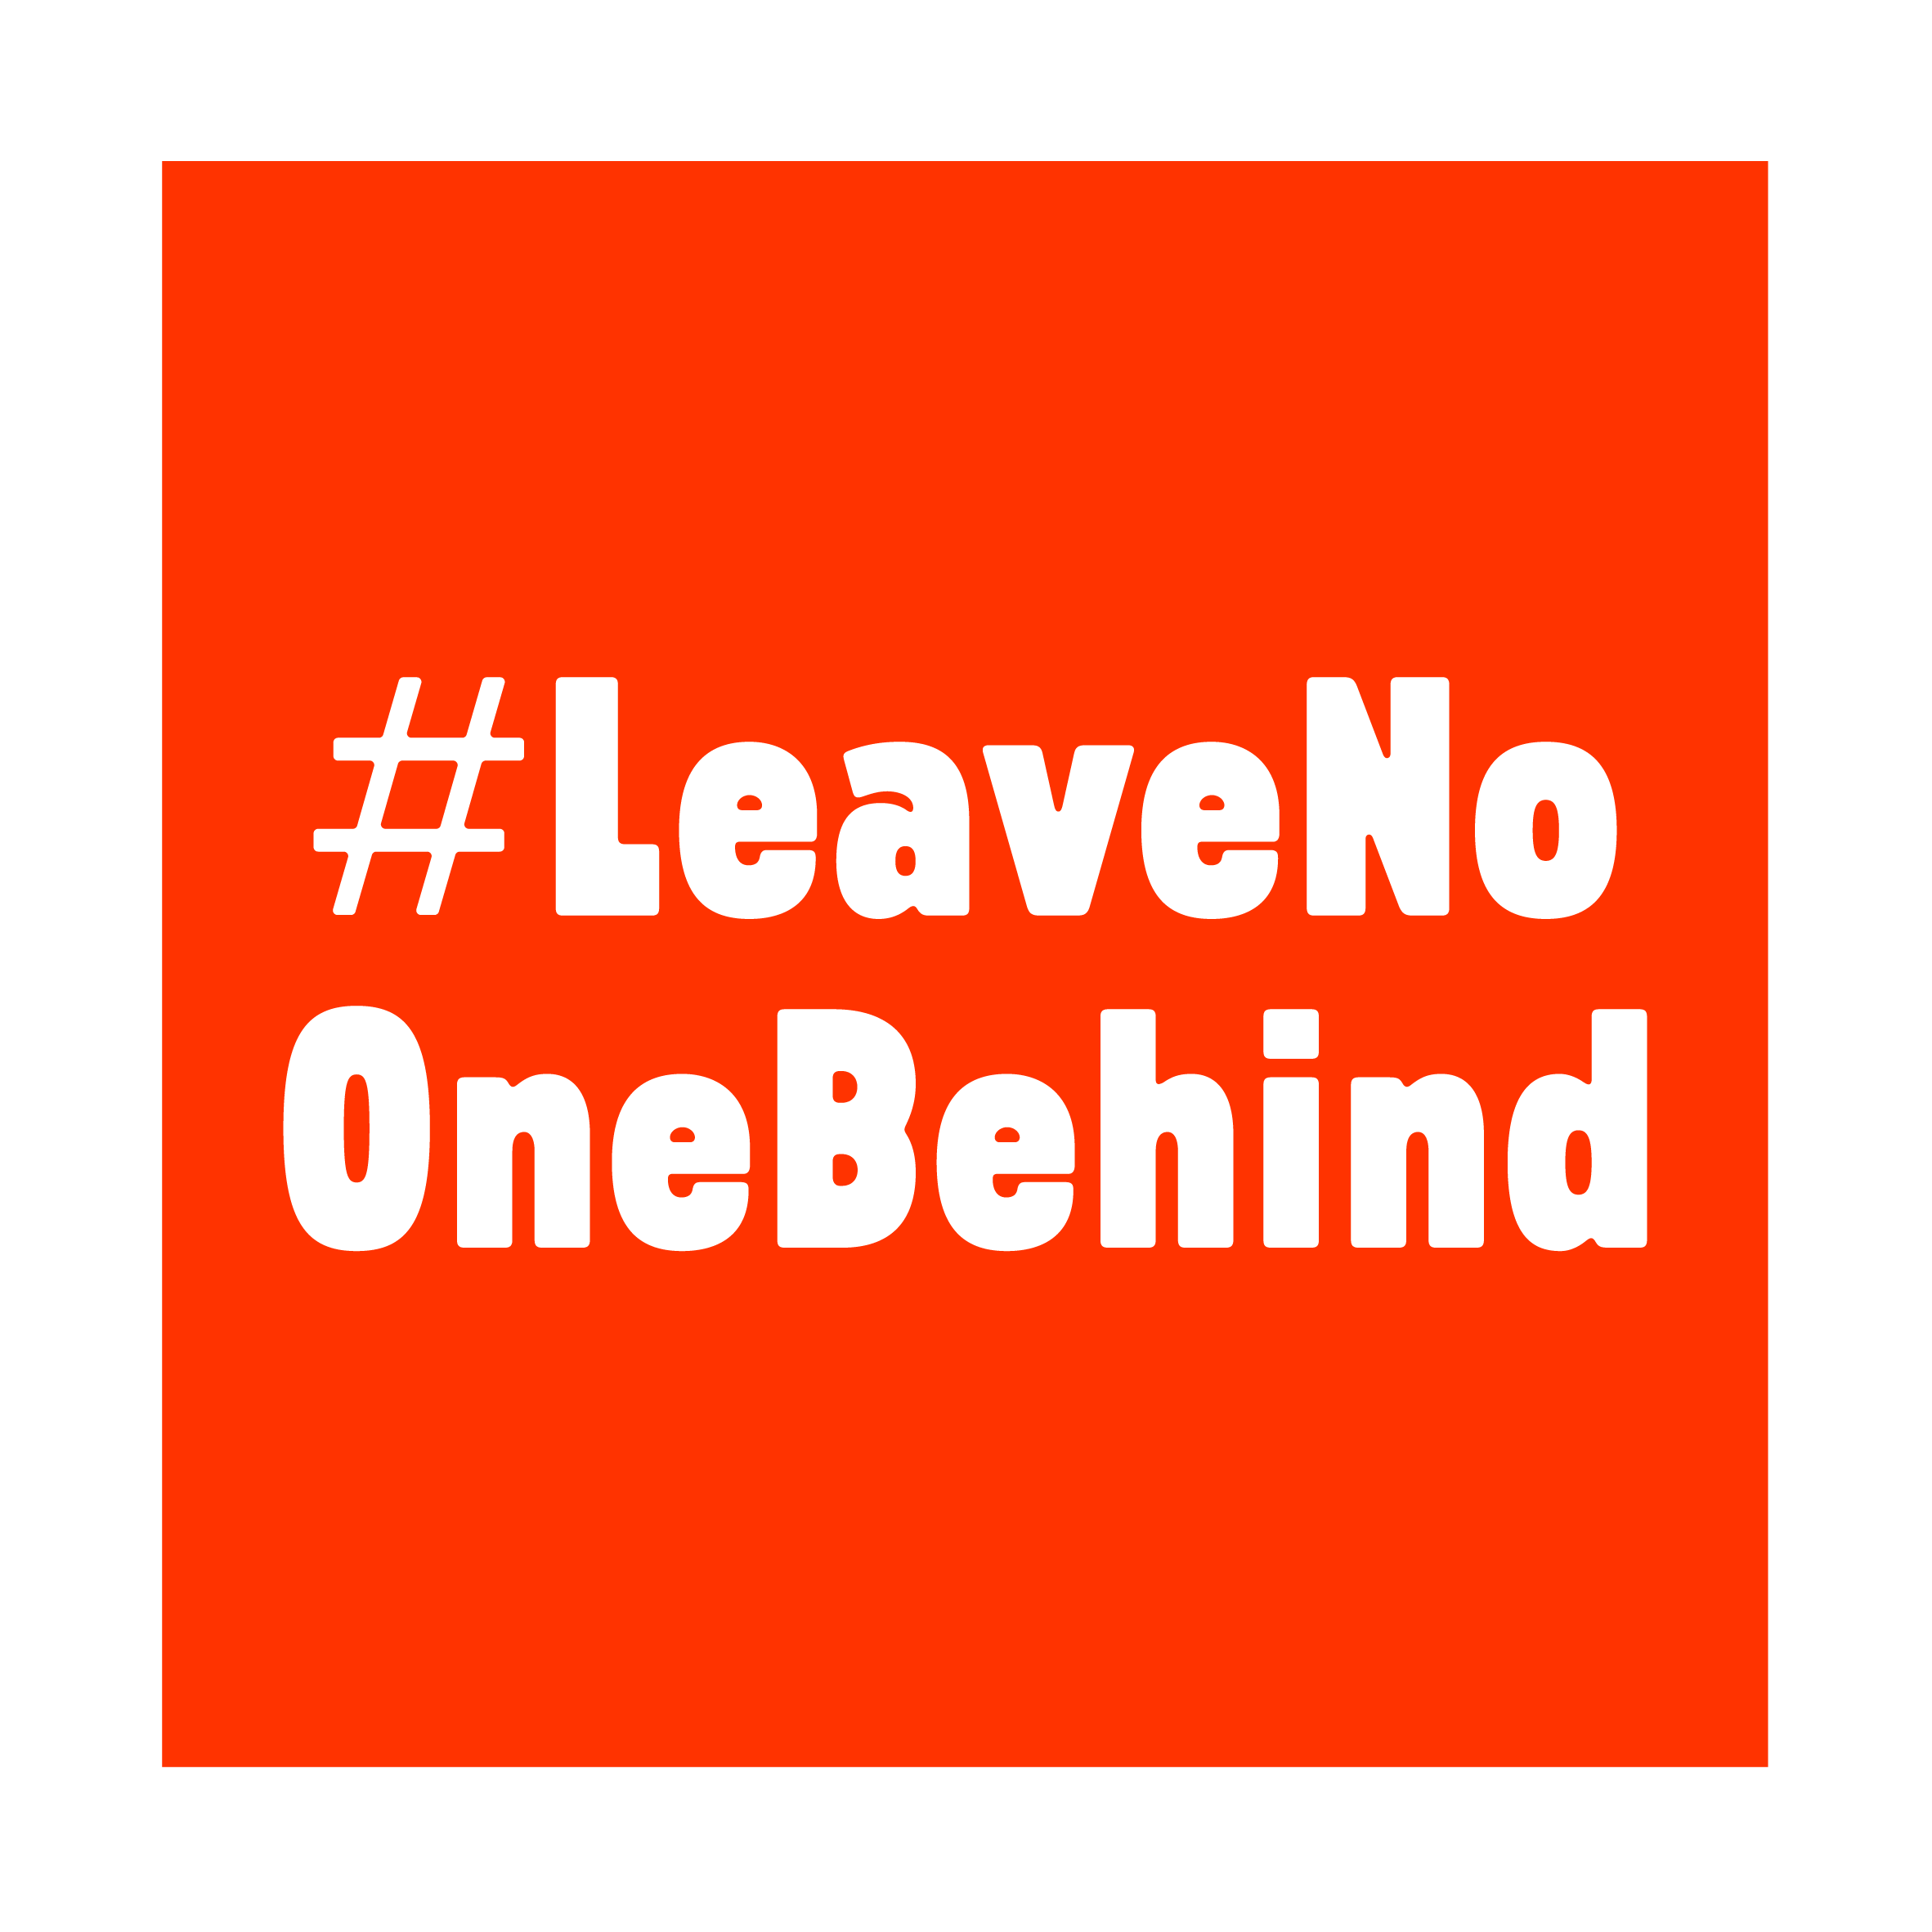 Leave No One Behind